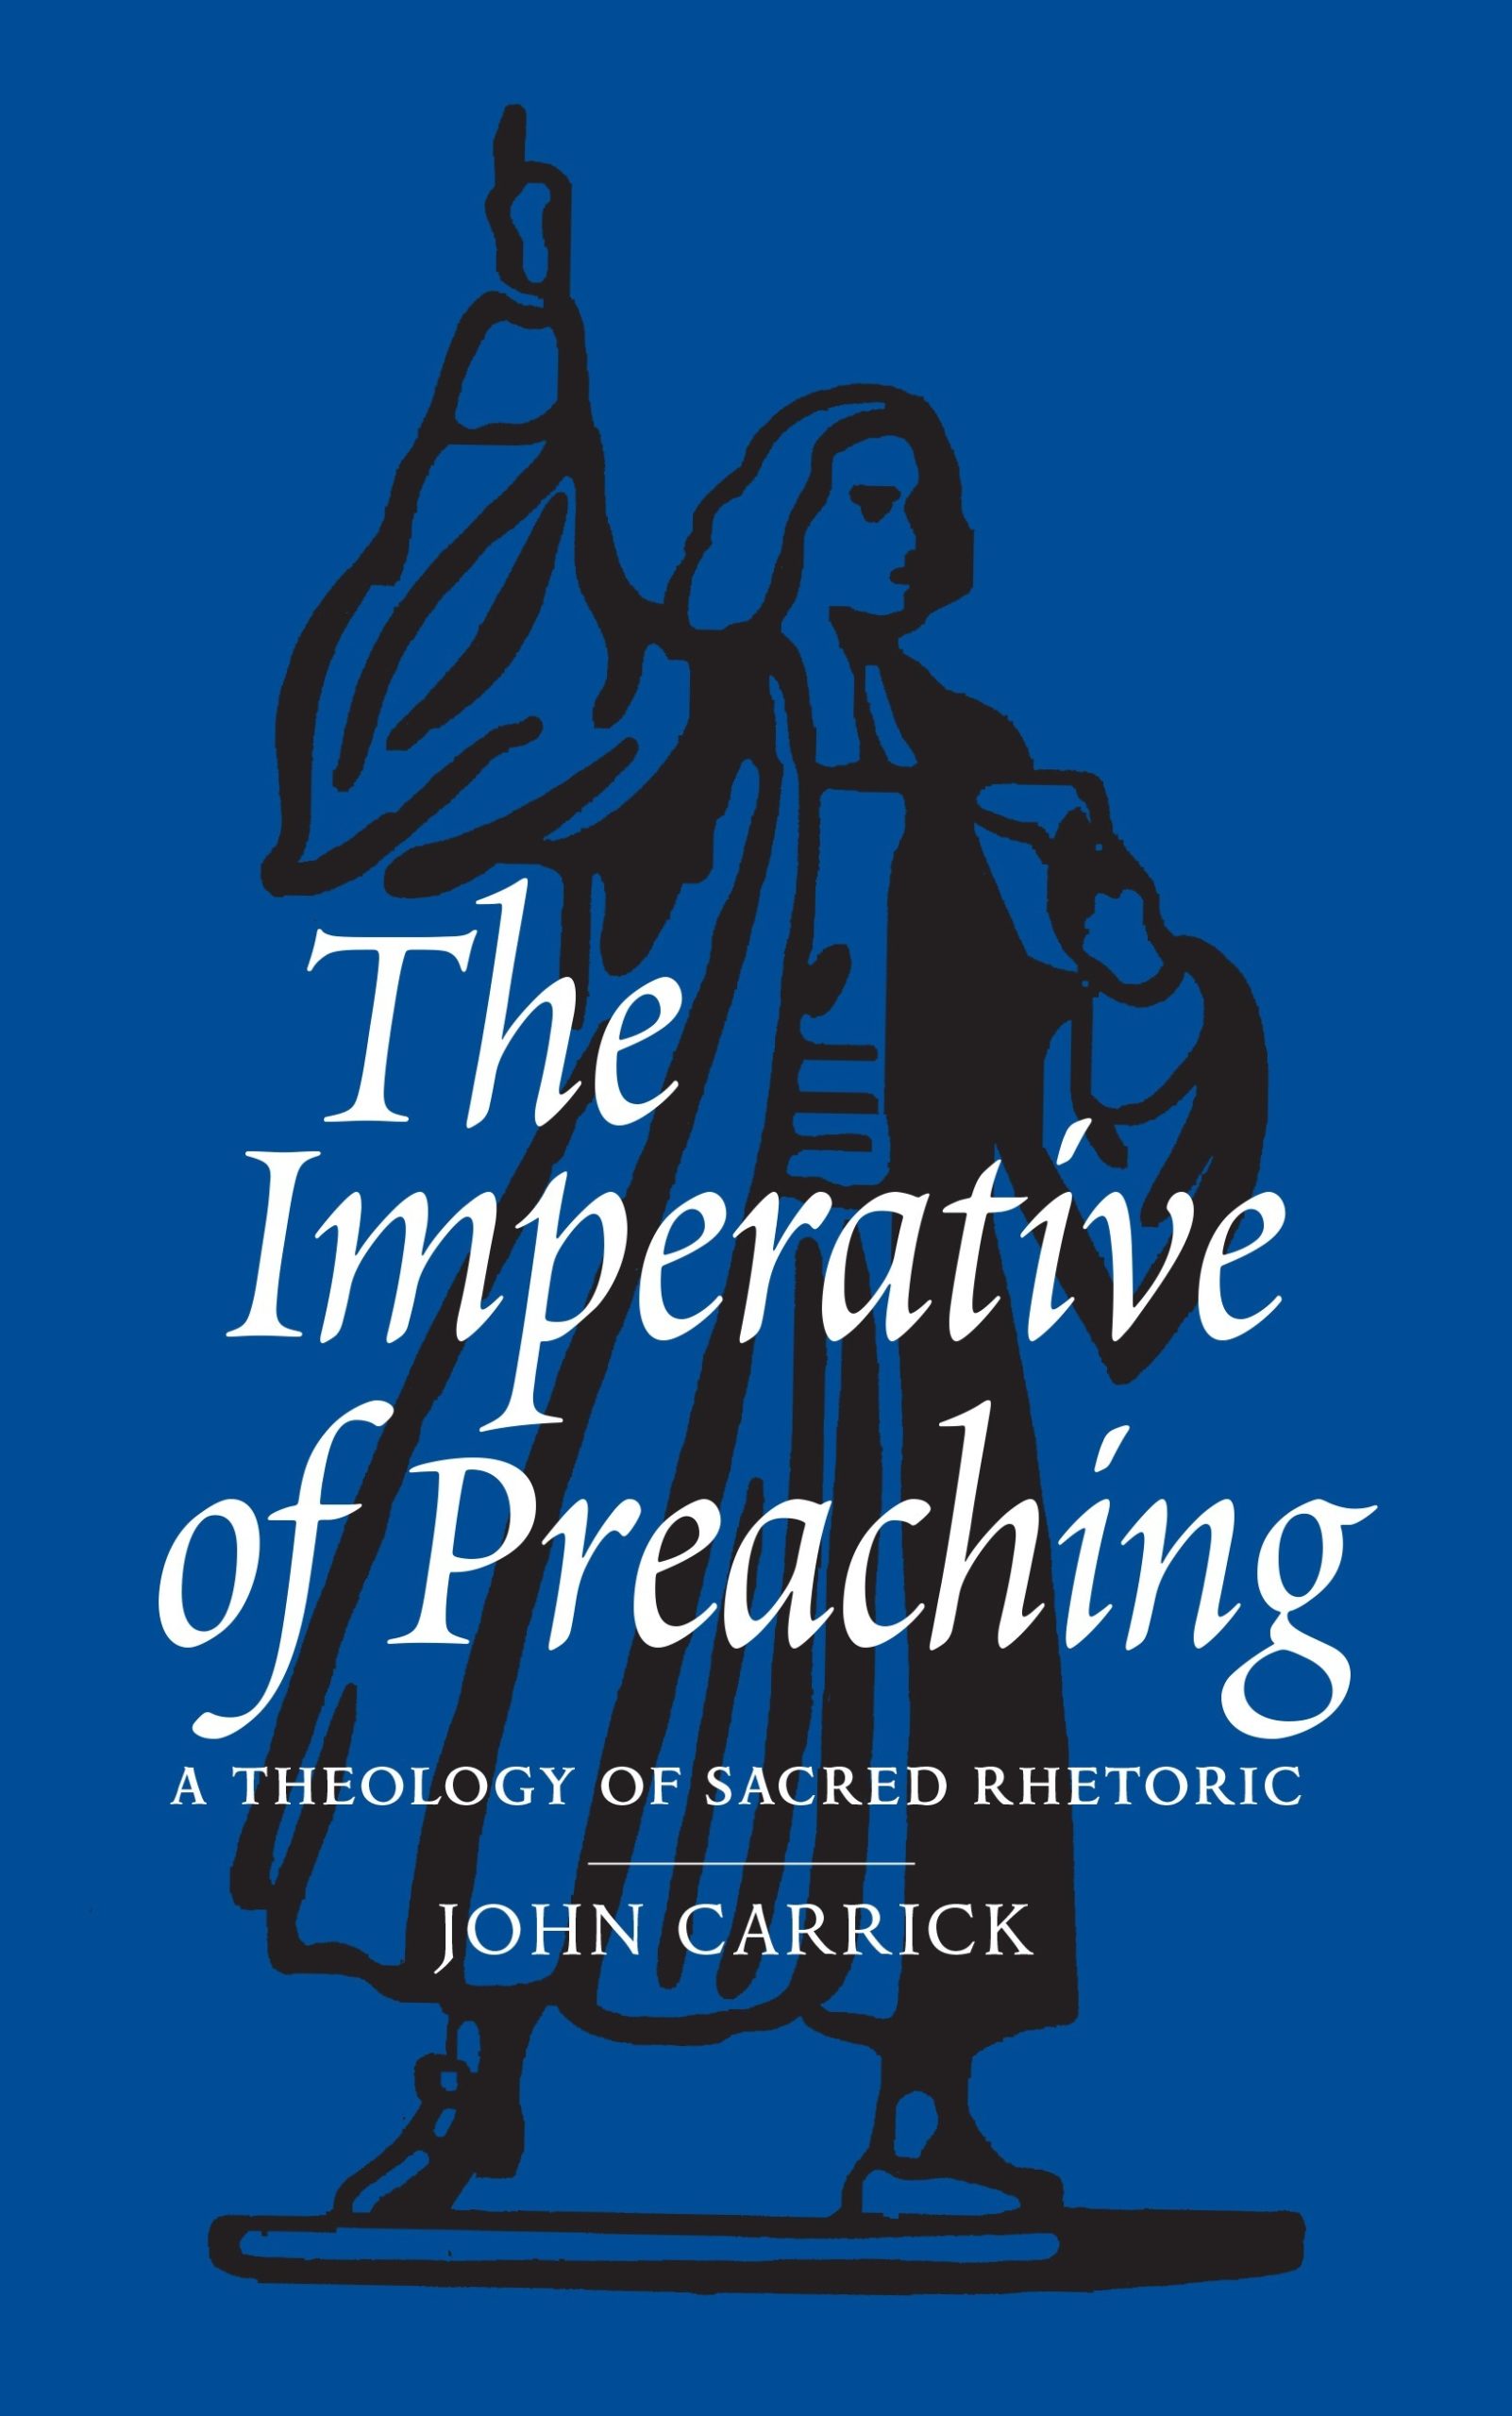 cover image for paperback edition of 'Imperative of Preaching'